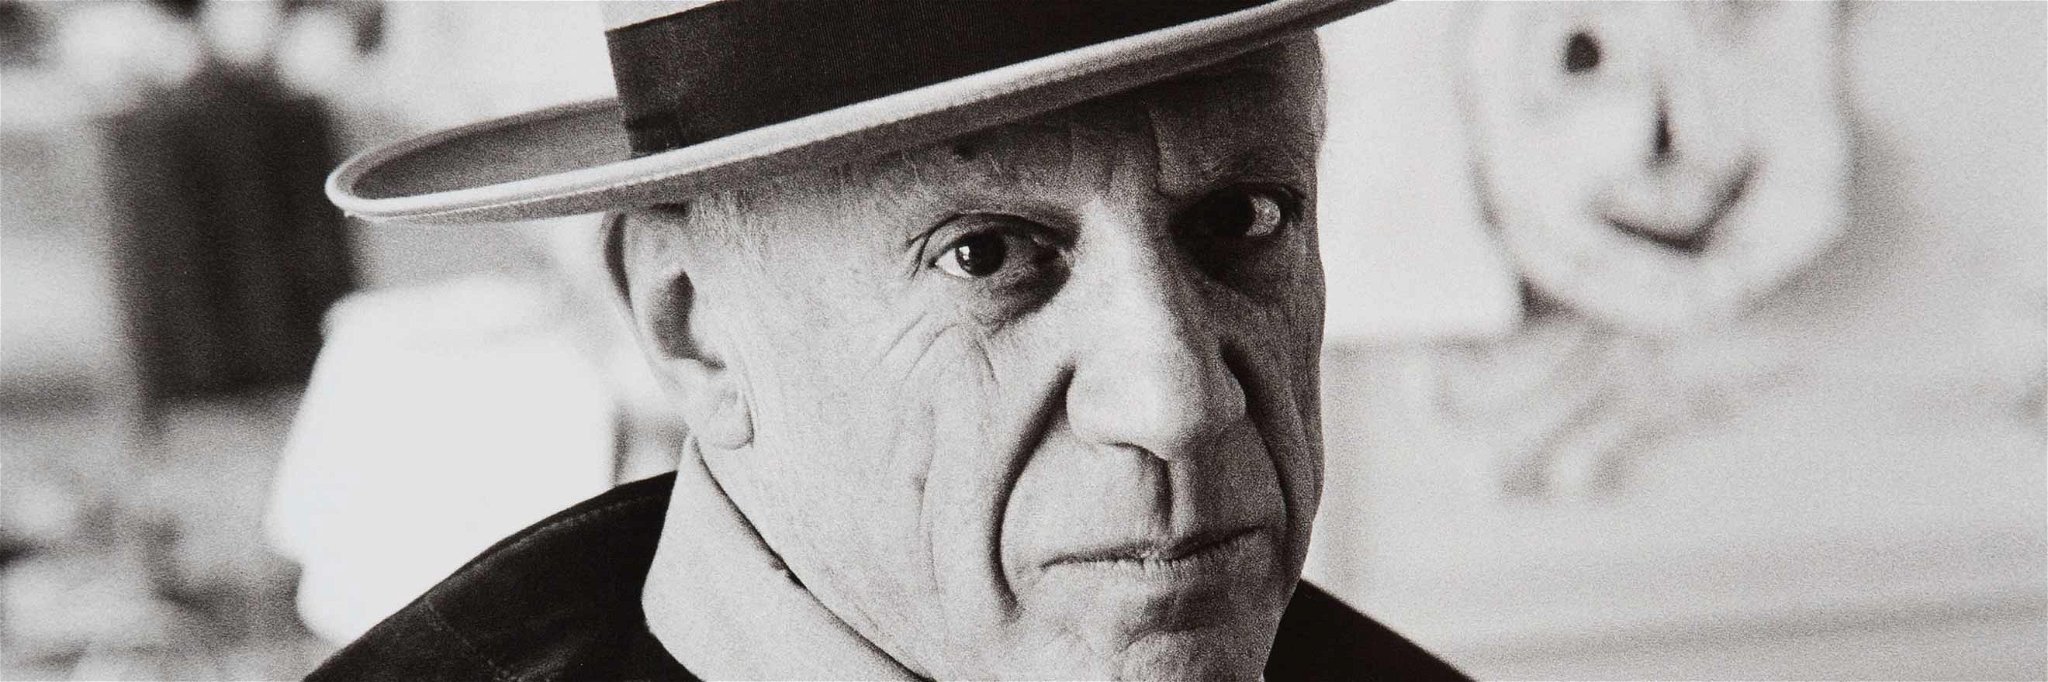 Pablo Picasso is considered one of the most influential artists of the 20th century.